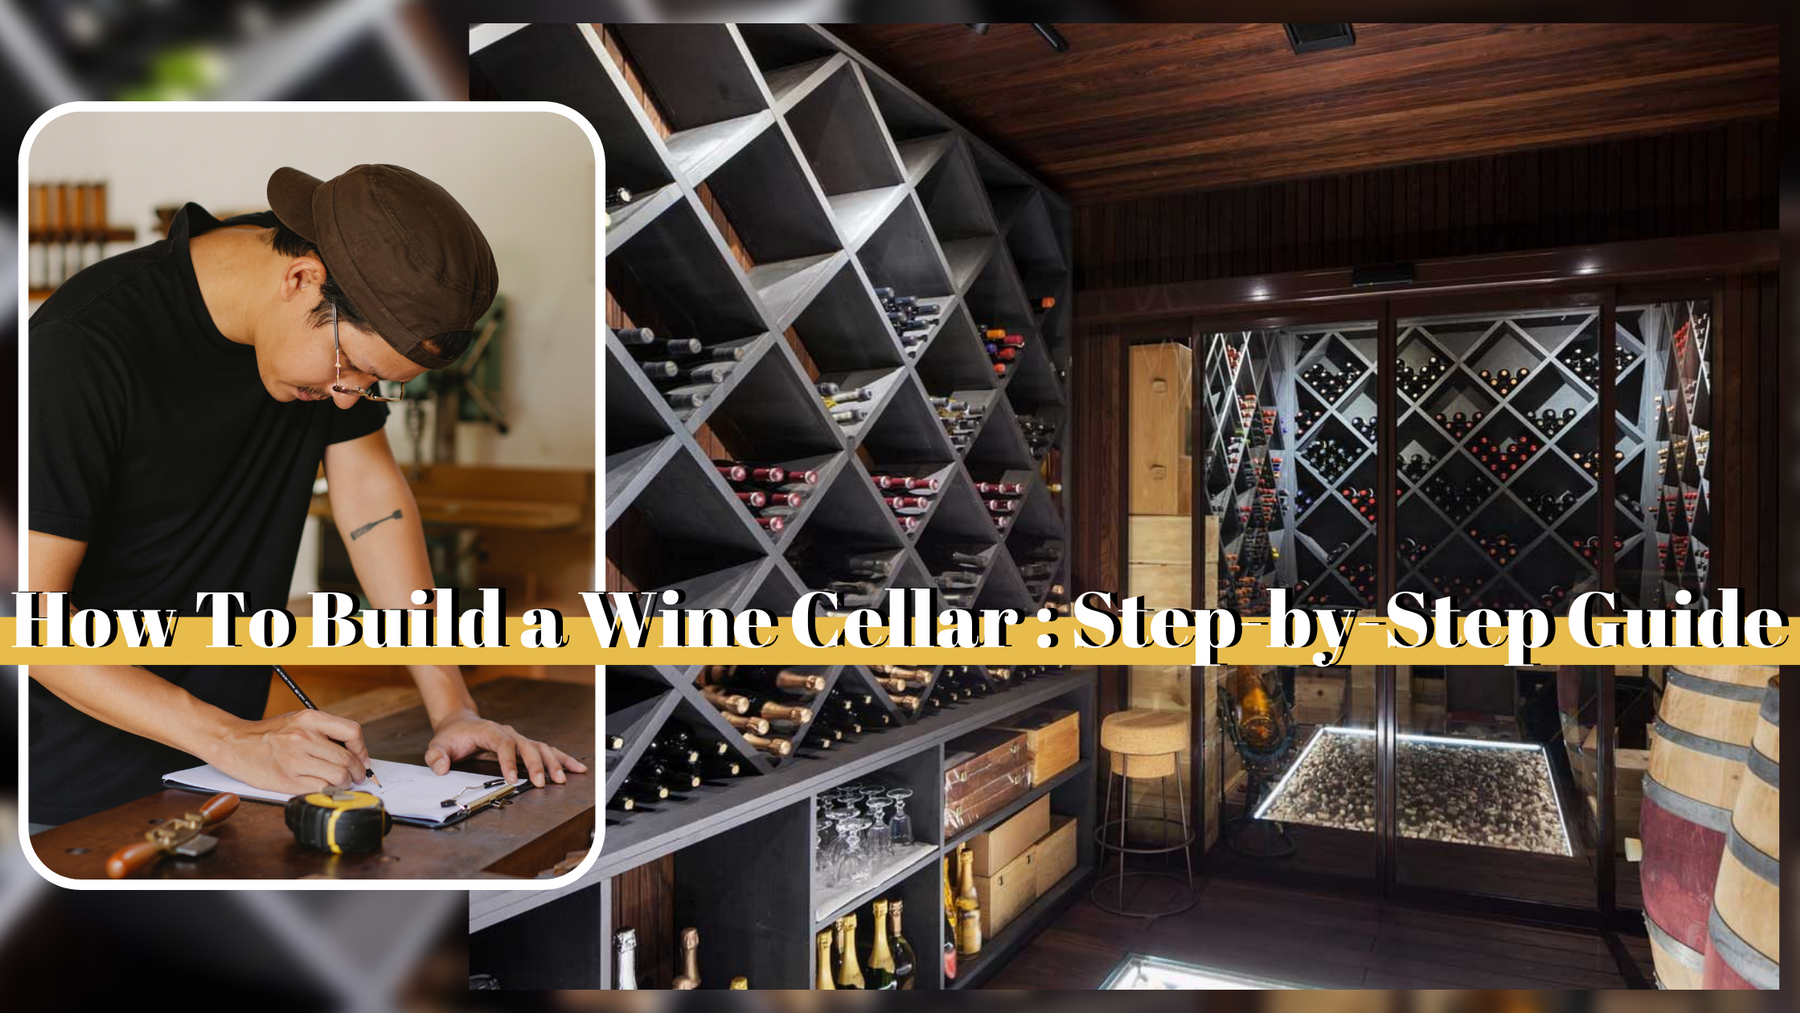 How to Build a Wine Cellar: Step-by-Step Guide